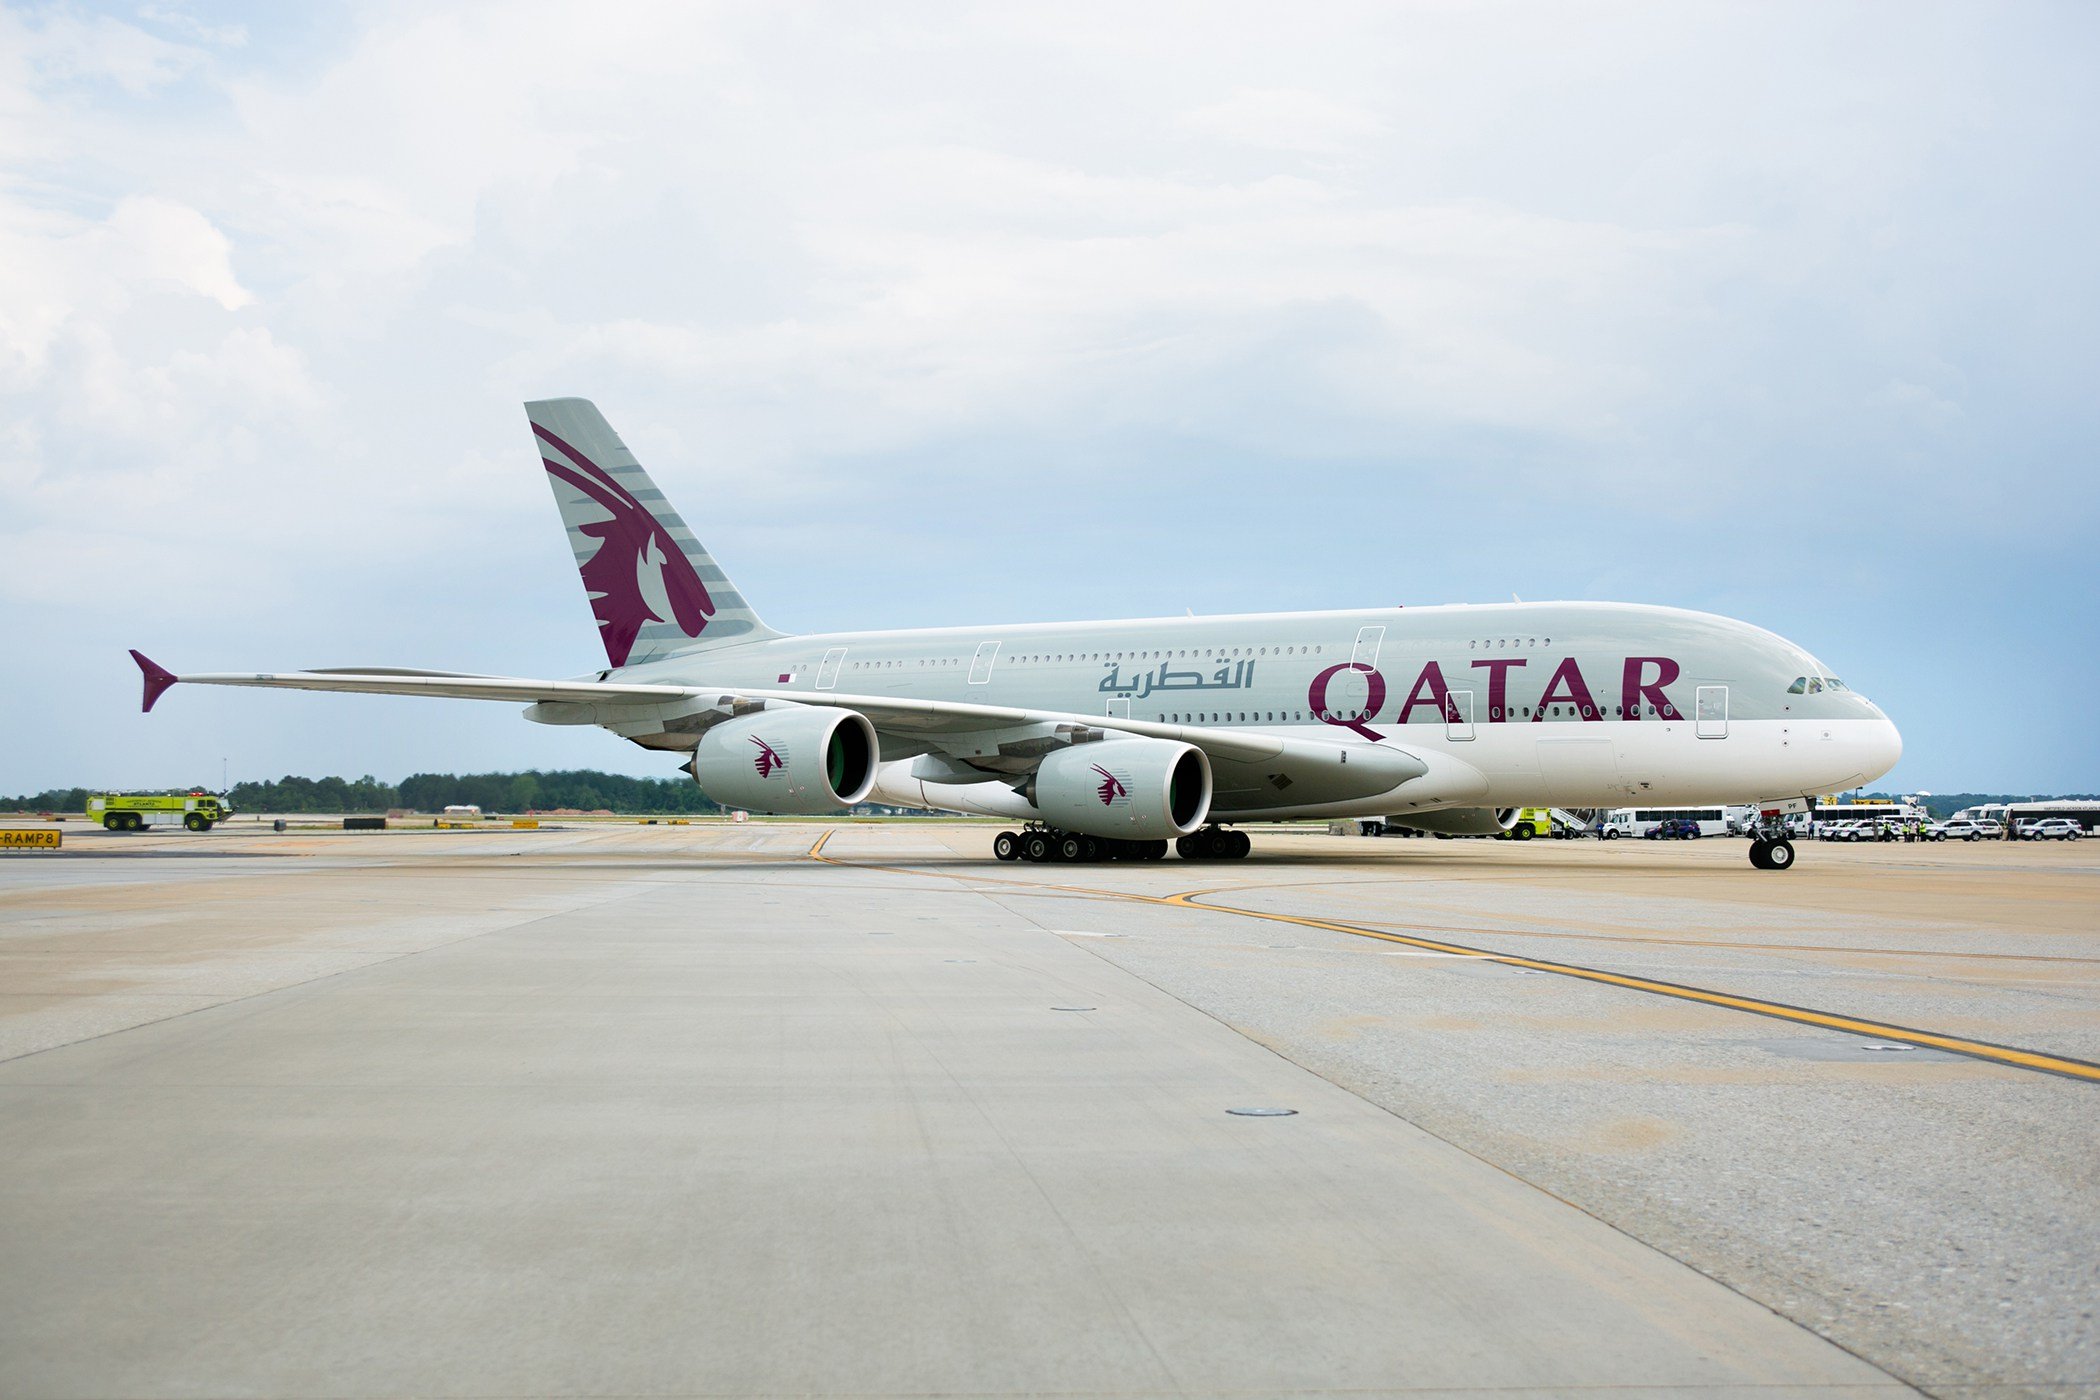 ATL officially welcomes Qatar Airways